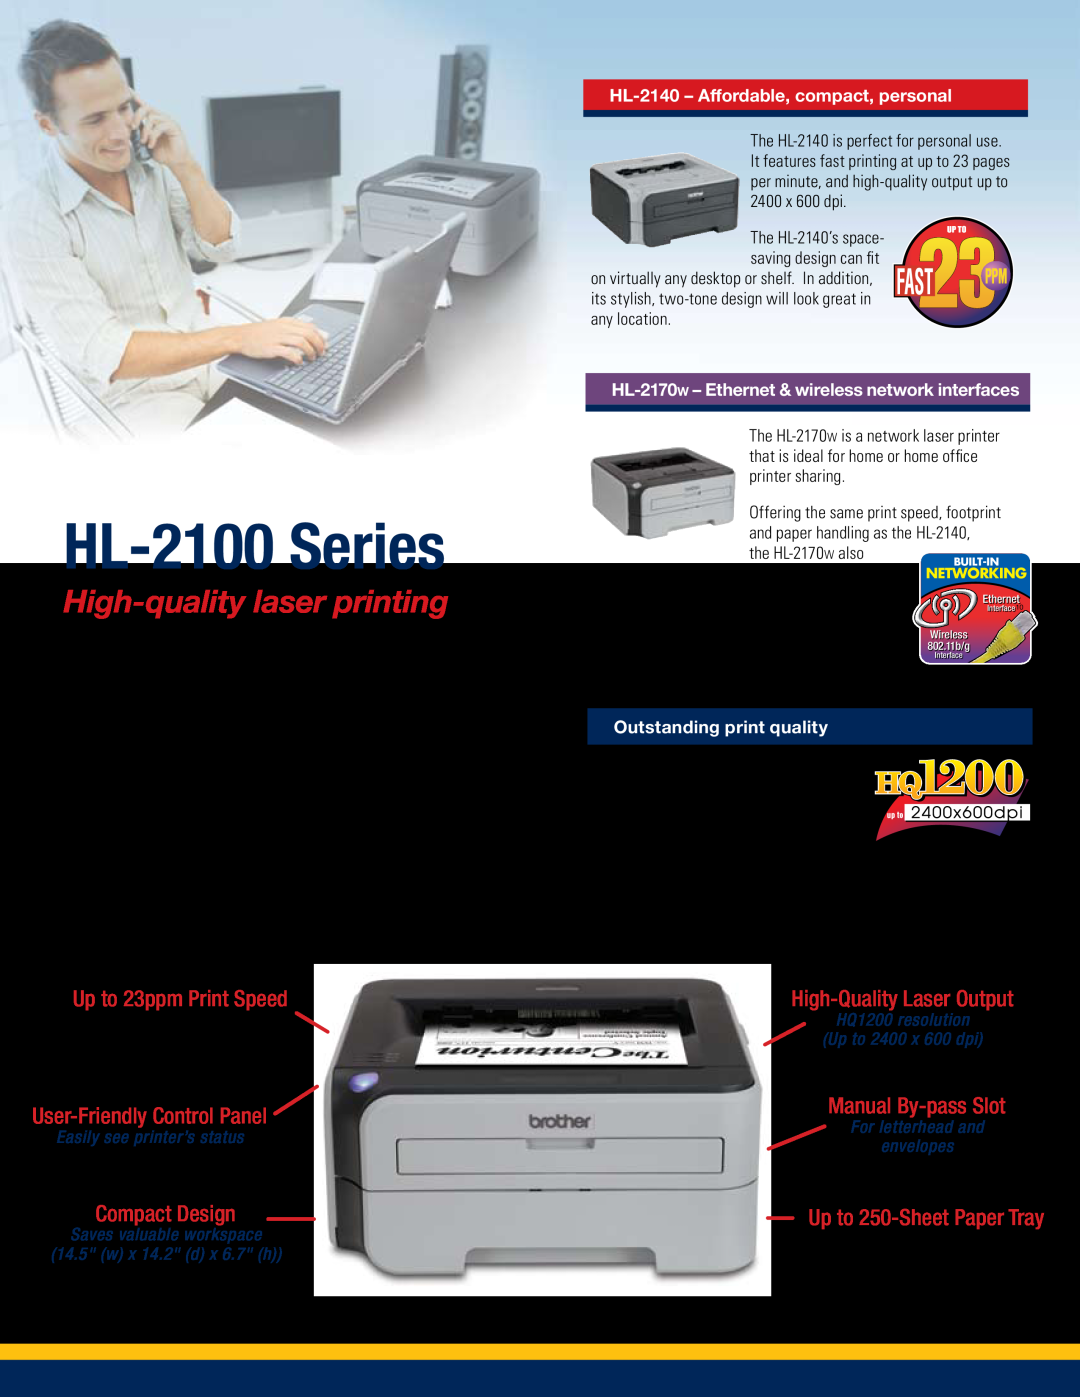 Brother HL-2140 - Affordable, compact, personal, HL-2170w - Ethernet & wireless network interfaces, HL-2100 Series 